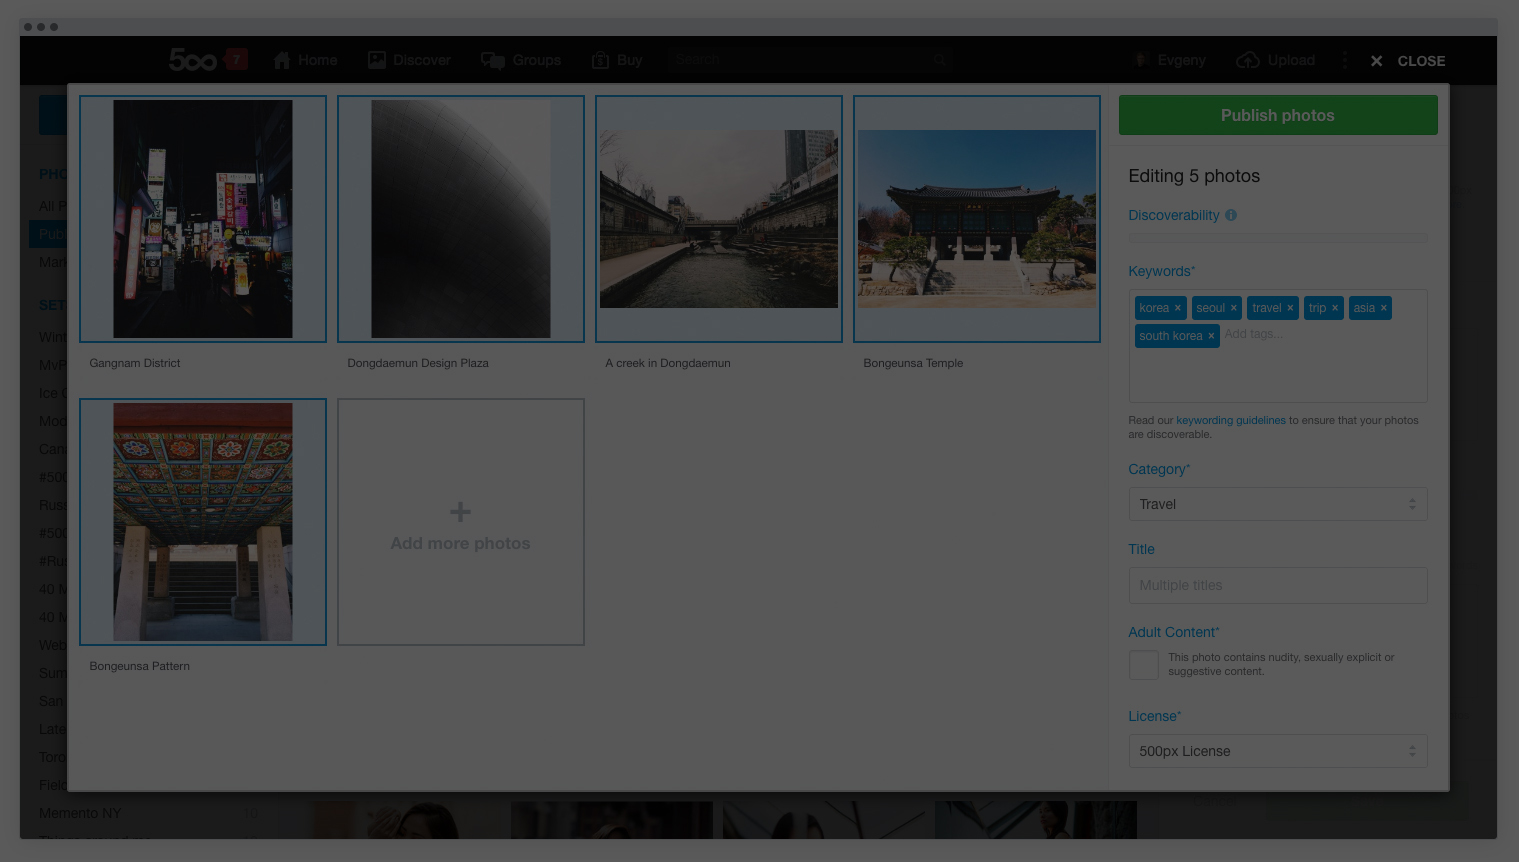 See the New 500px Uploader in Action, Now with Bulk Upload!